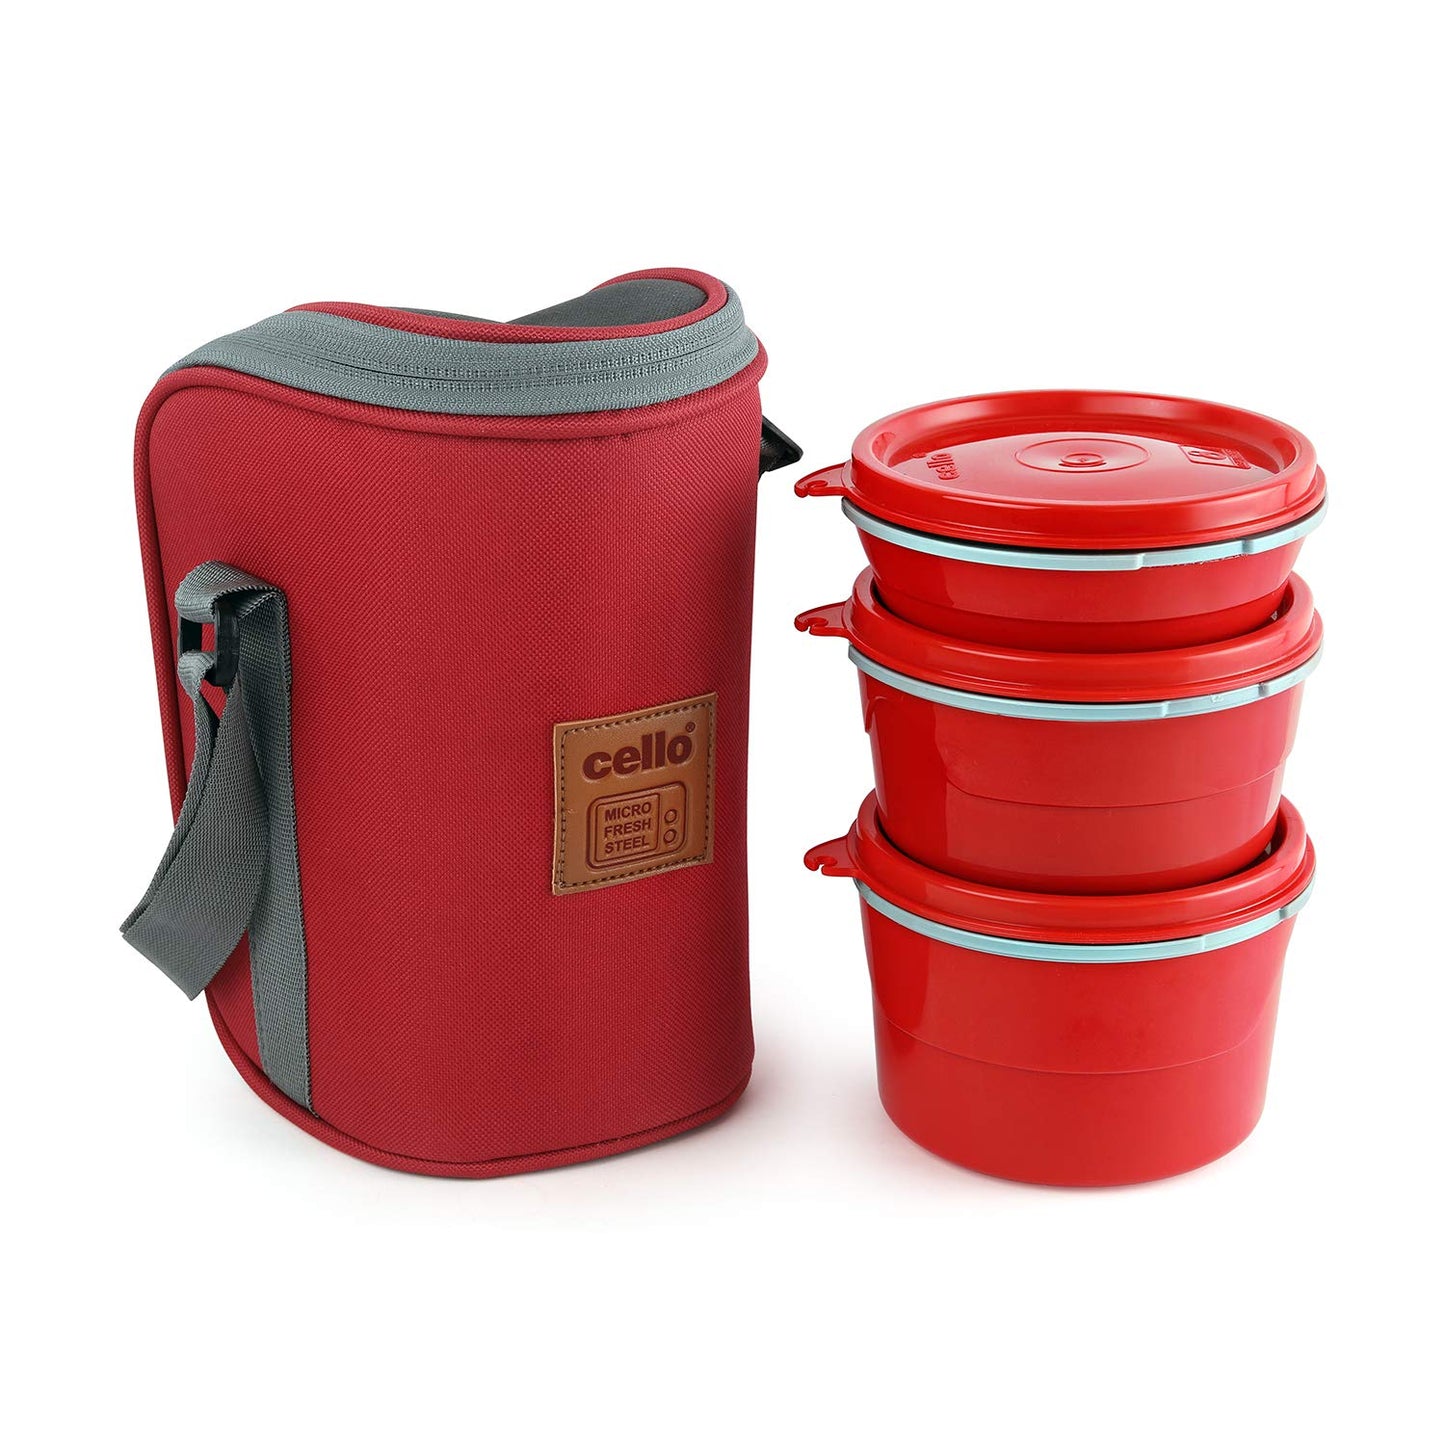 CELLO Maxfresh Hot Wave Stainless Steel 3 Container Lunch Box 225ml, 375ml and 550ml Red